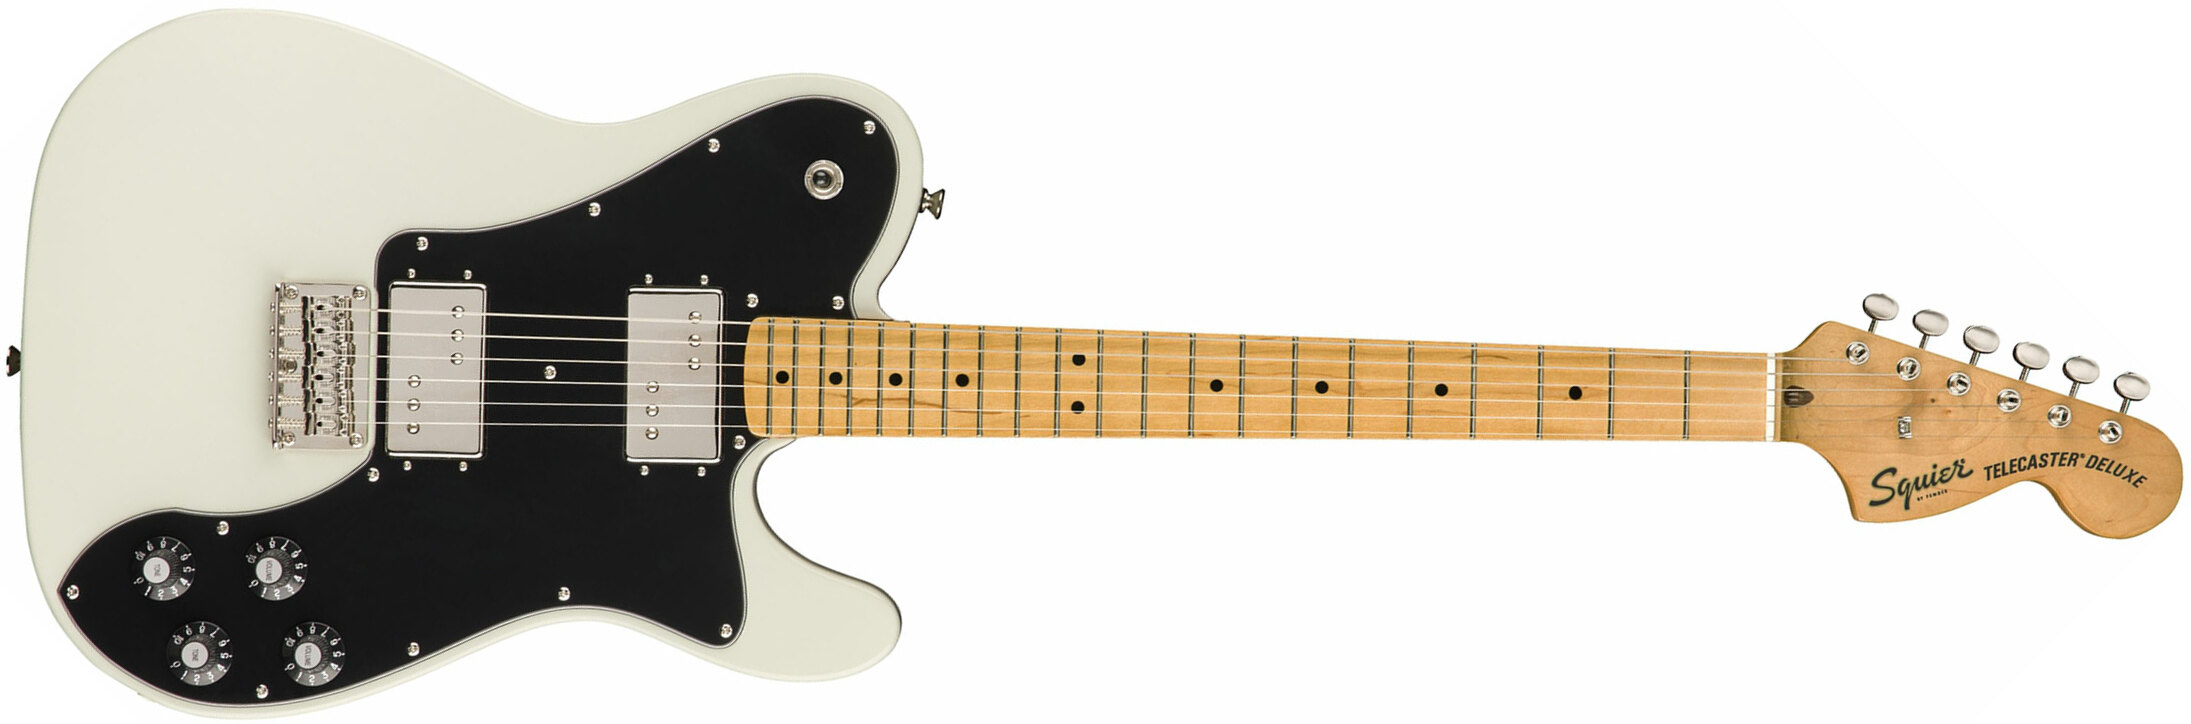 Squier Tele Deluxe Classic Vibe 70s 2019 Hh Mn - Olympic White - Tel shape electric guitar - Main picture